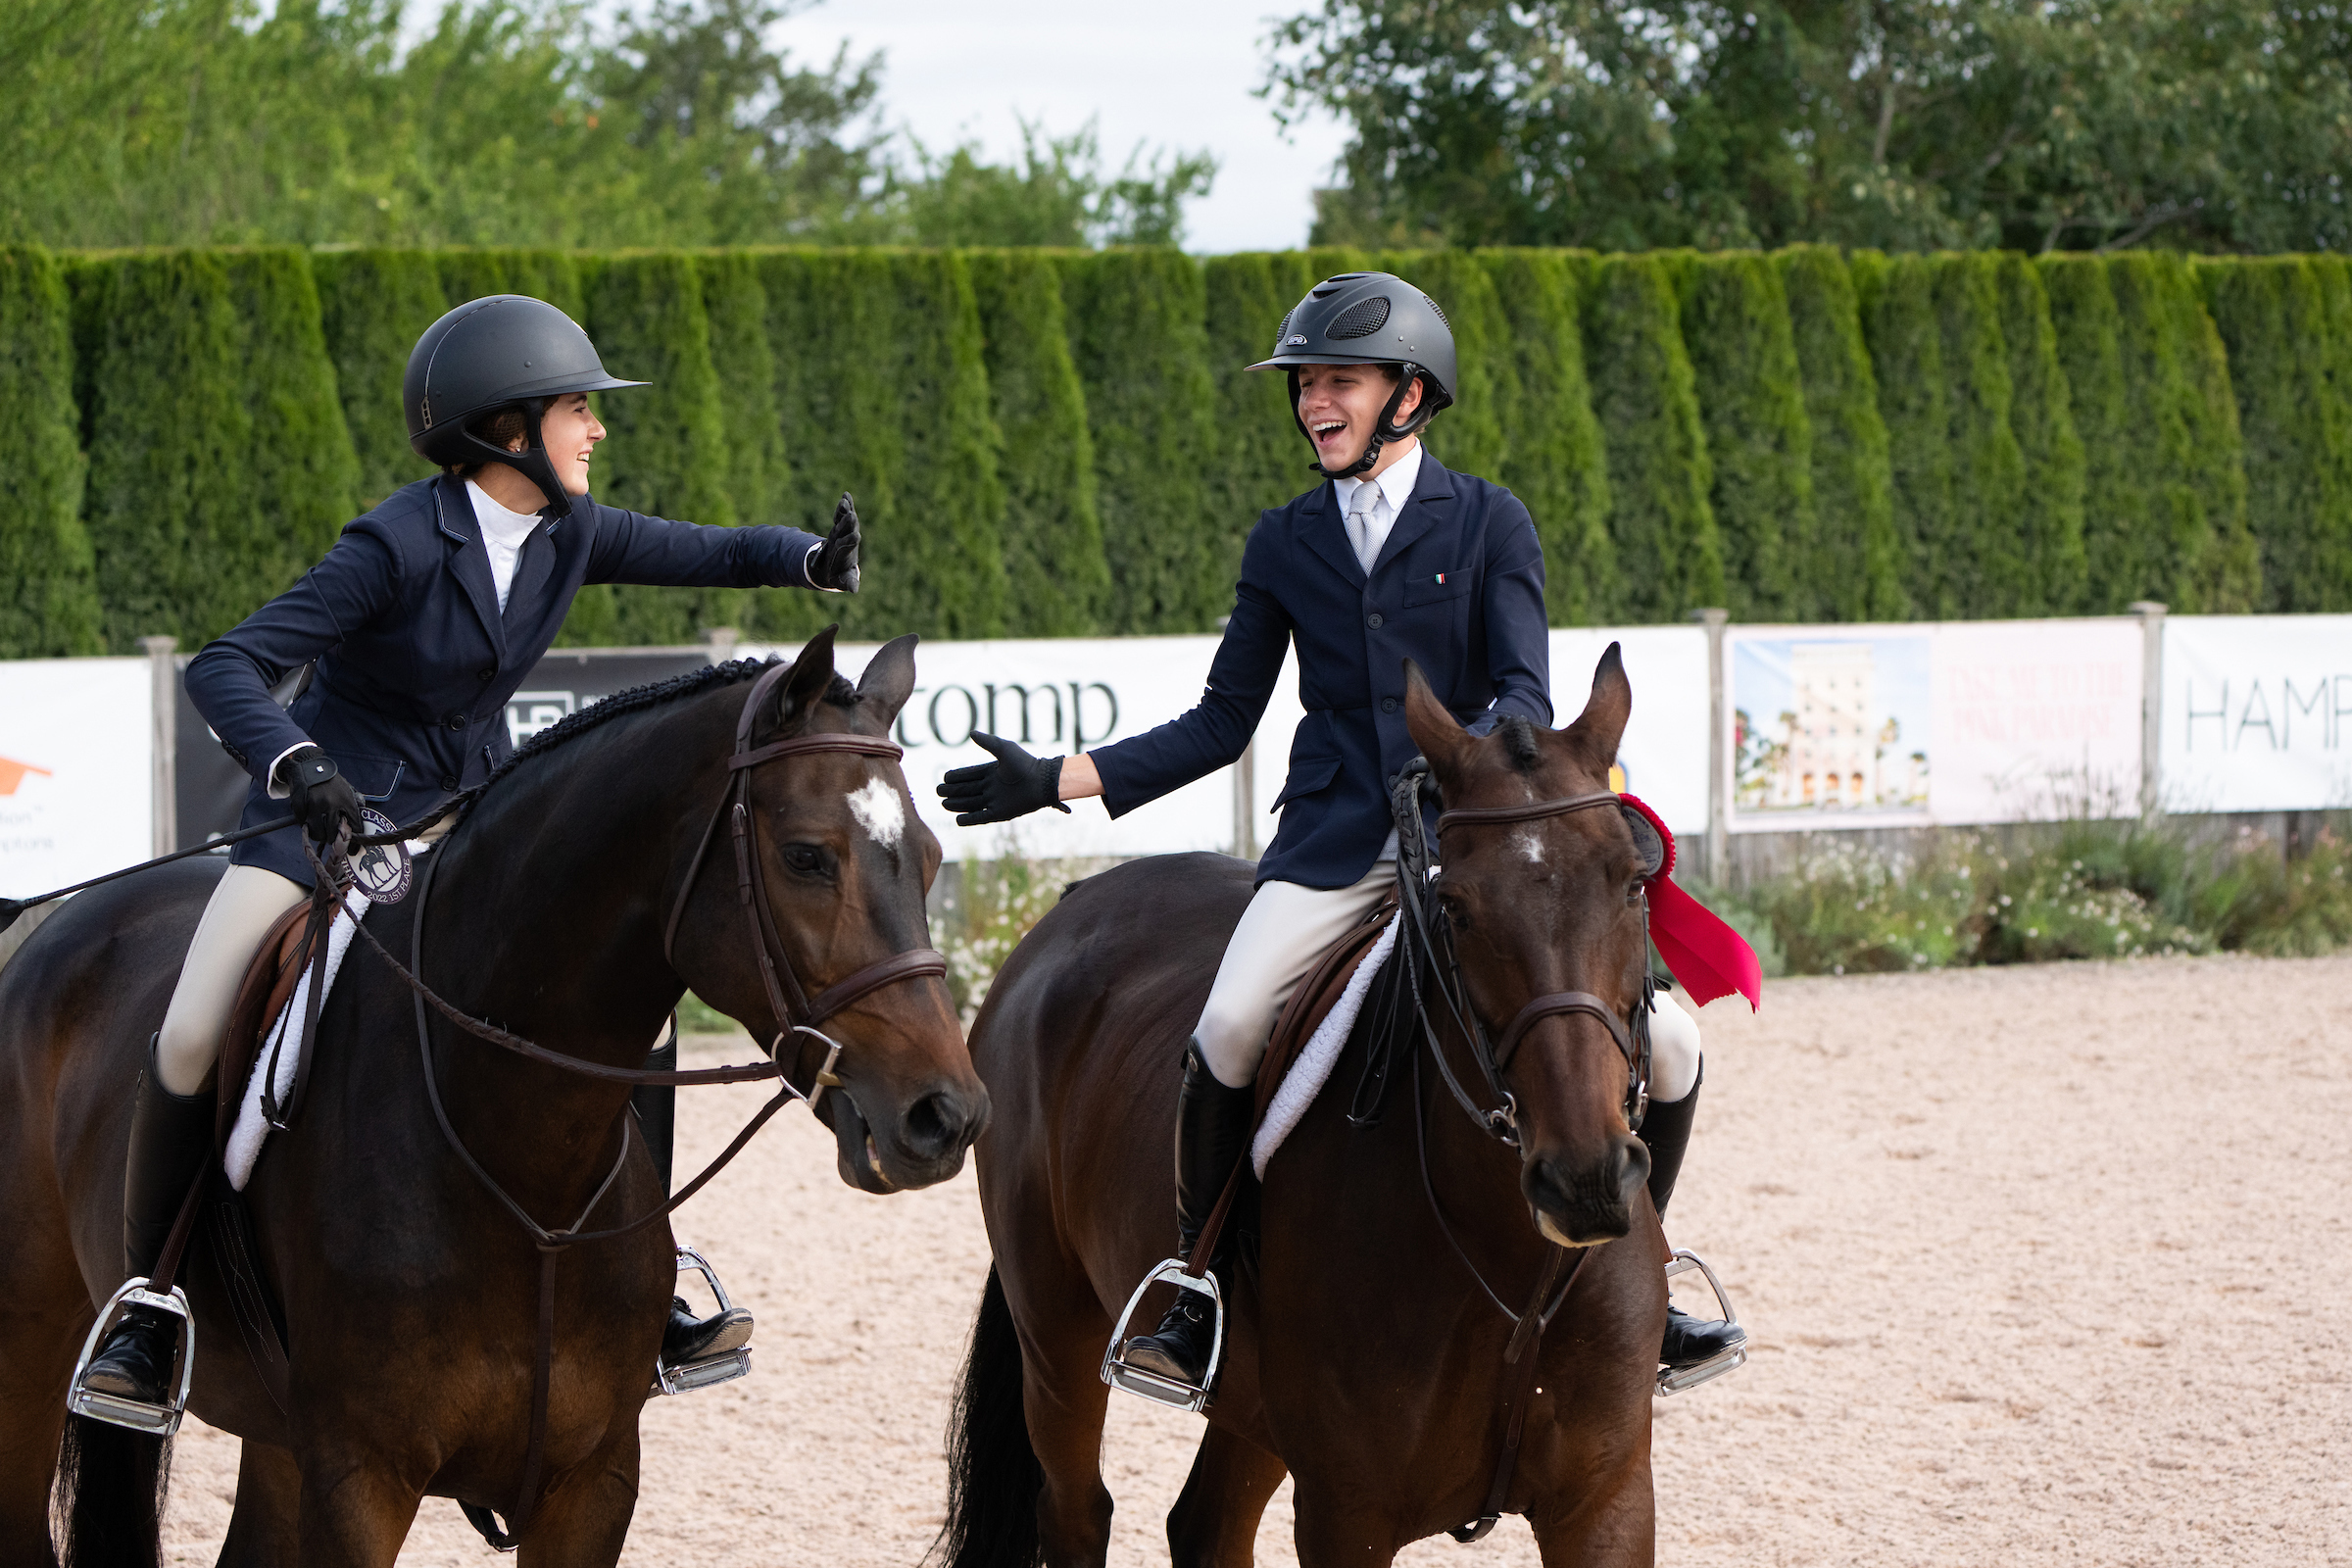 Riders Amelia Burnside and Liam Gaspar, who both train with Erin Stewart of Erin Stewart LLC,  each took home both a blue first-place ribbon and red second-place ribbon in the junior equitation division on Opening Day. LORI HAWKINS